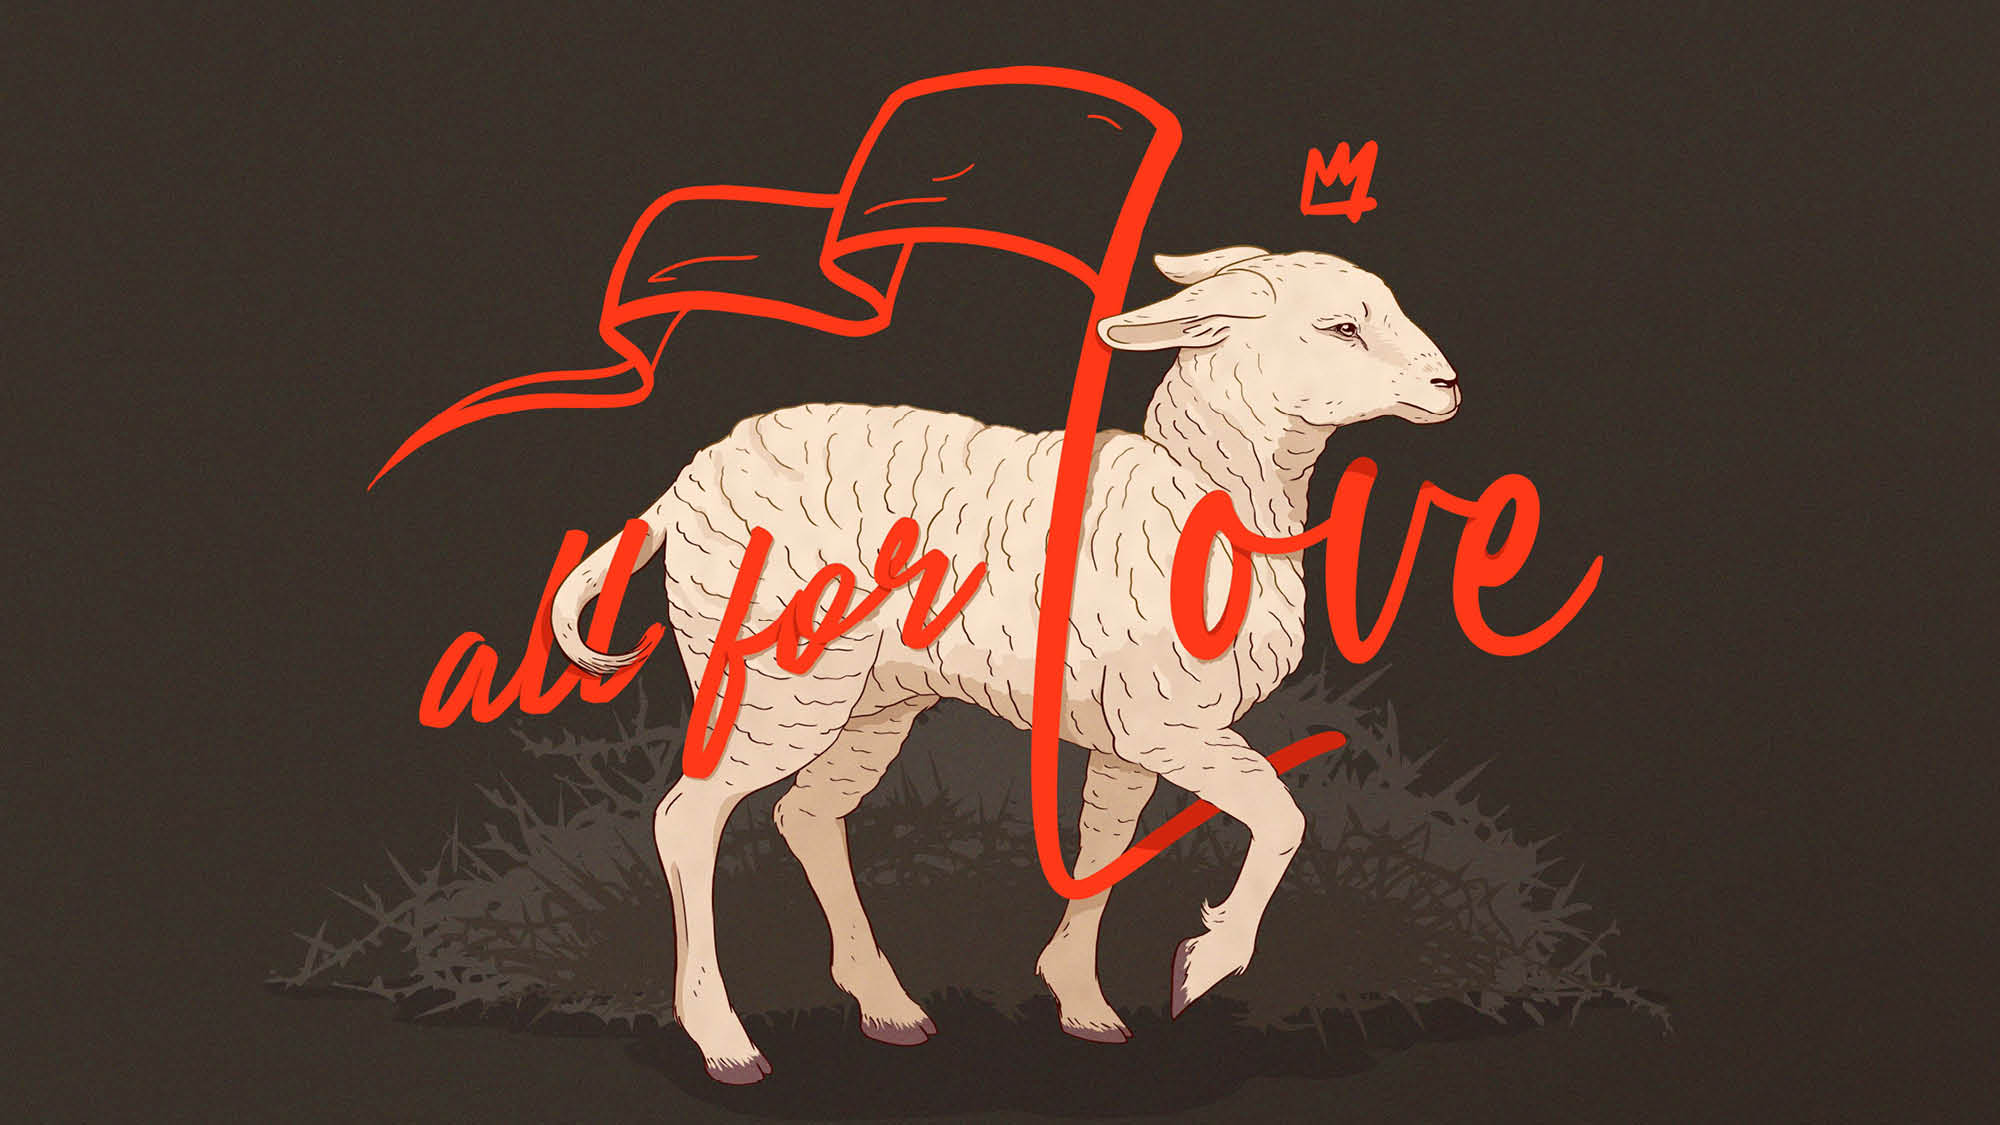 All for Love: The Lord is Lamb